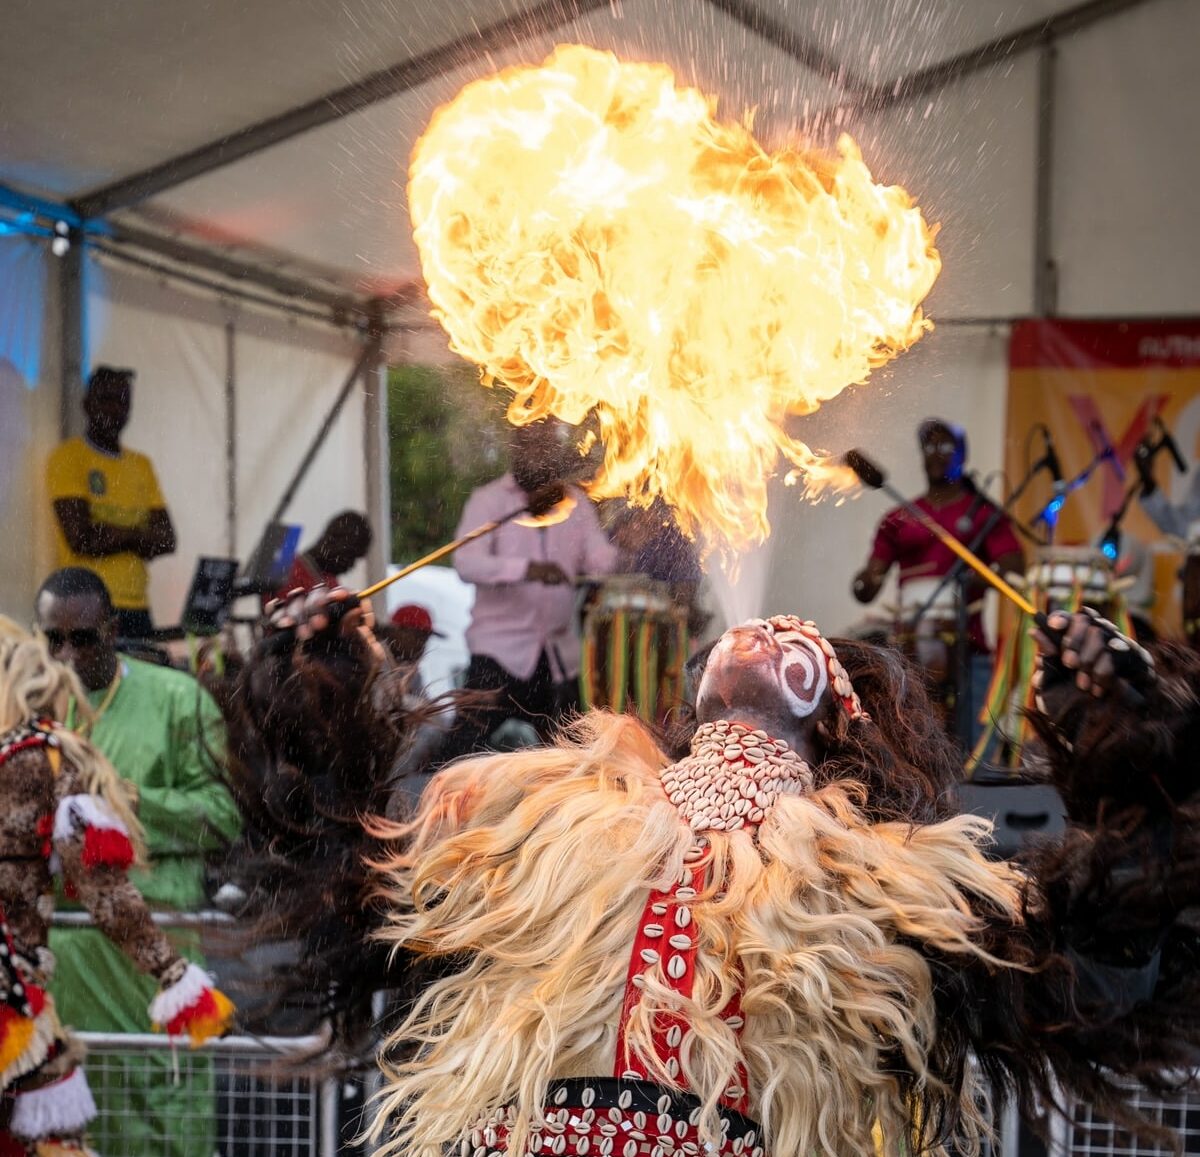 A performer in traditional ornate African clothing spits fire from his mouth.